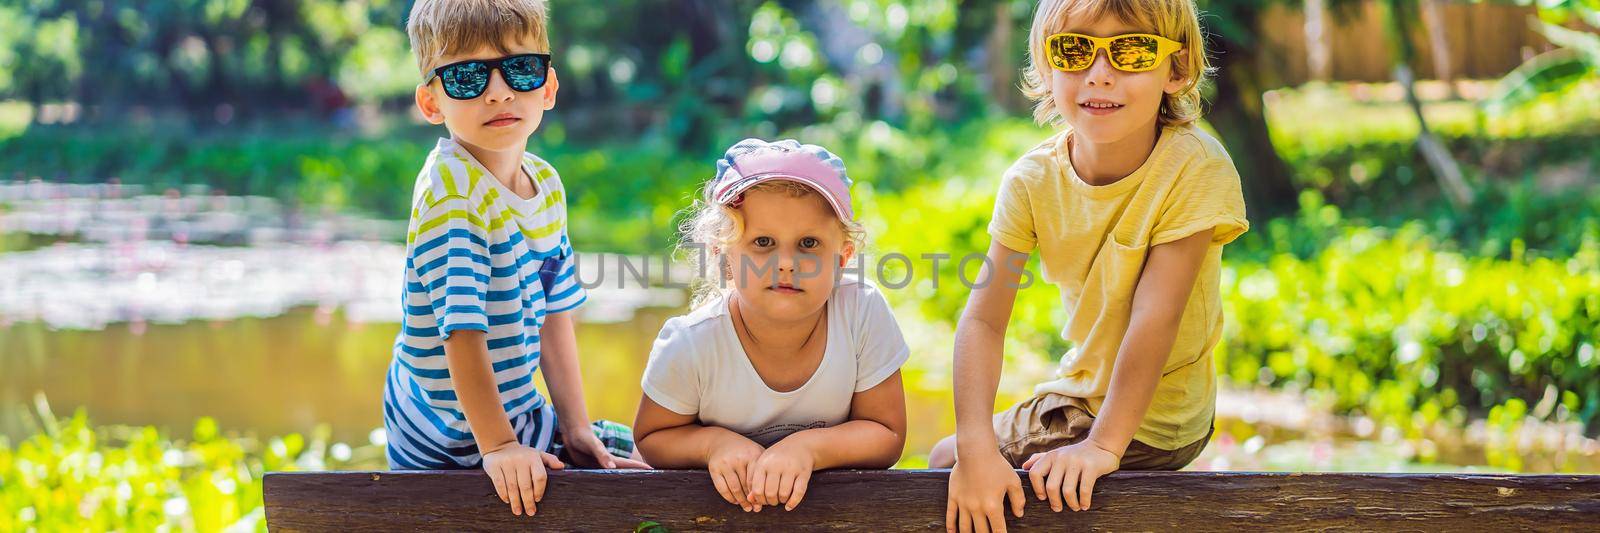 Children rest during a hike in the woods BANNER, LONG FORMAT by galitskaya